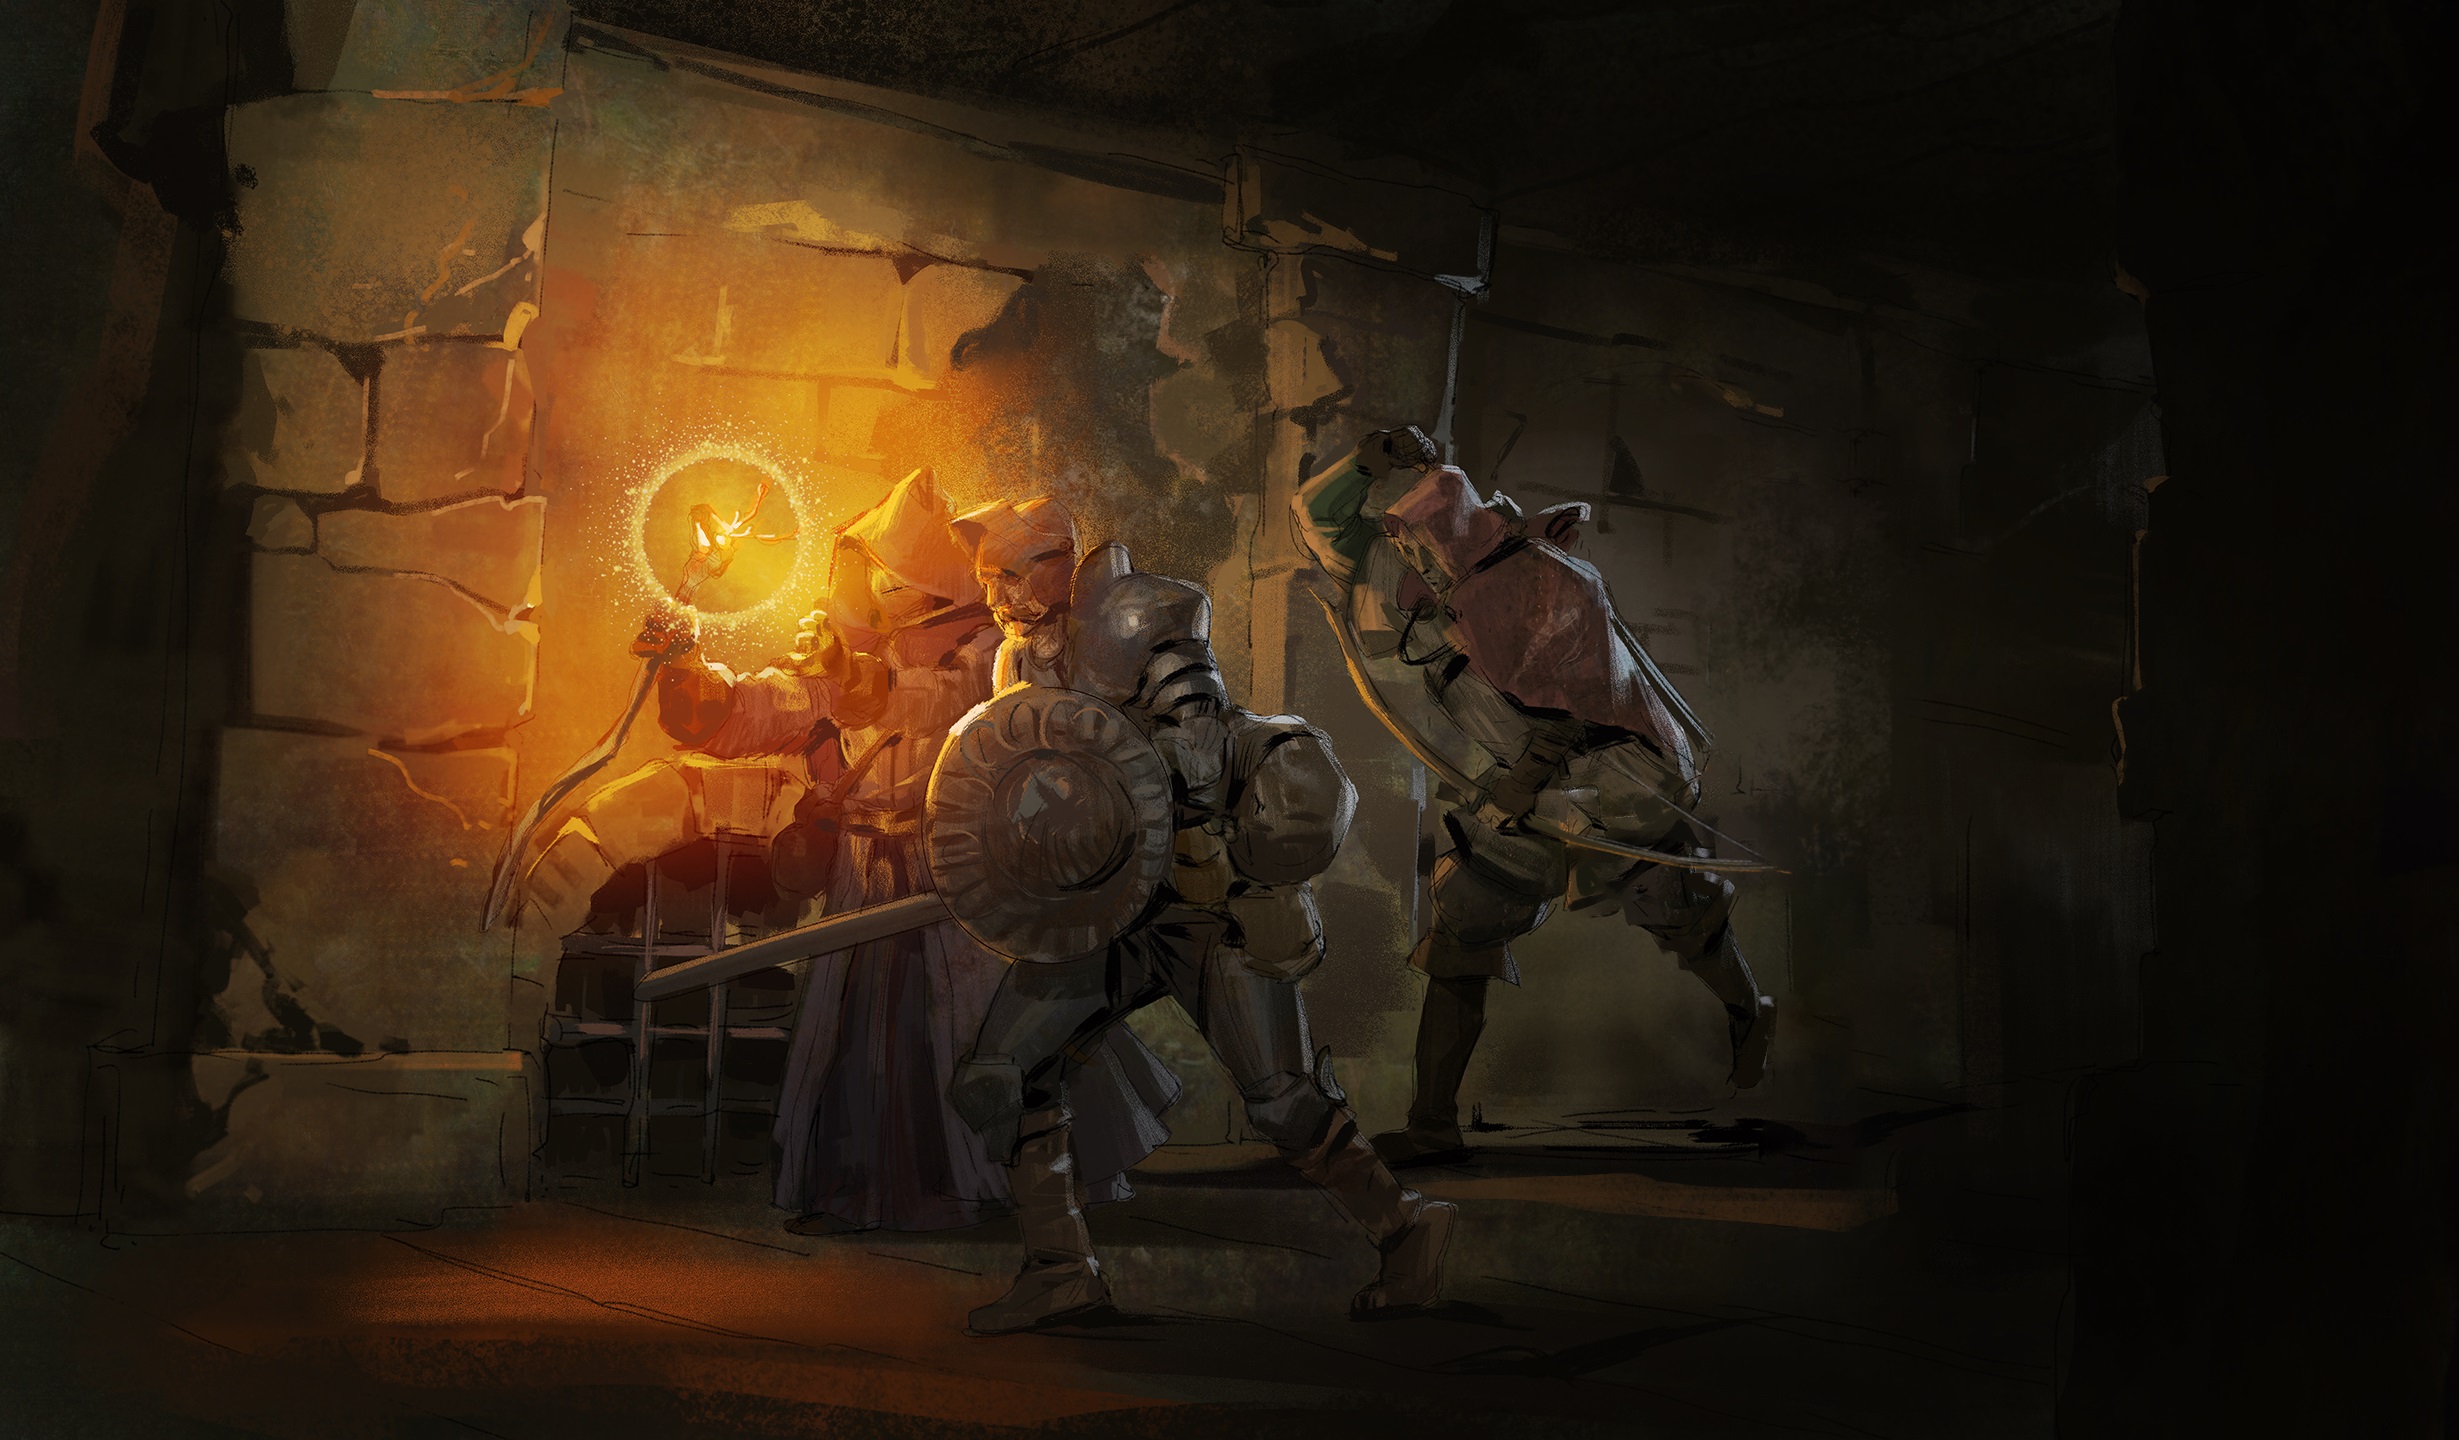 Dark and Darker concept art - a mage casts a light spell carefully exploring a dungeon with a knight and rogue